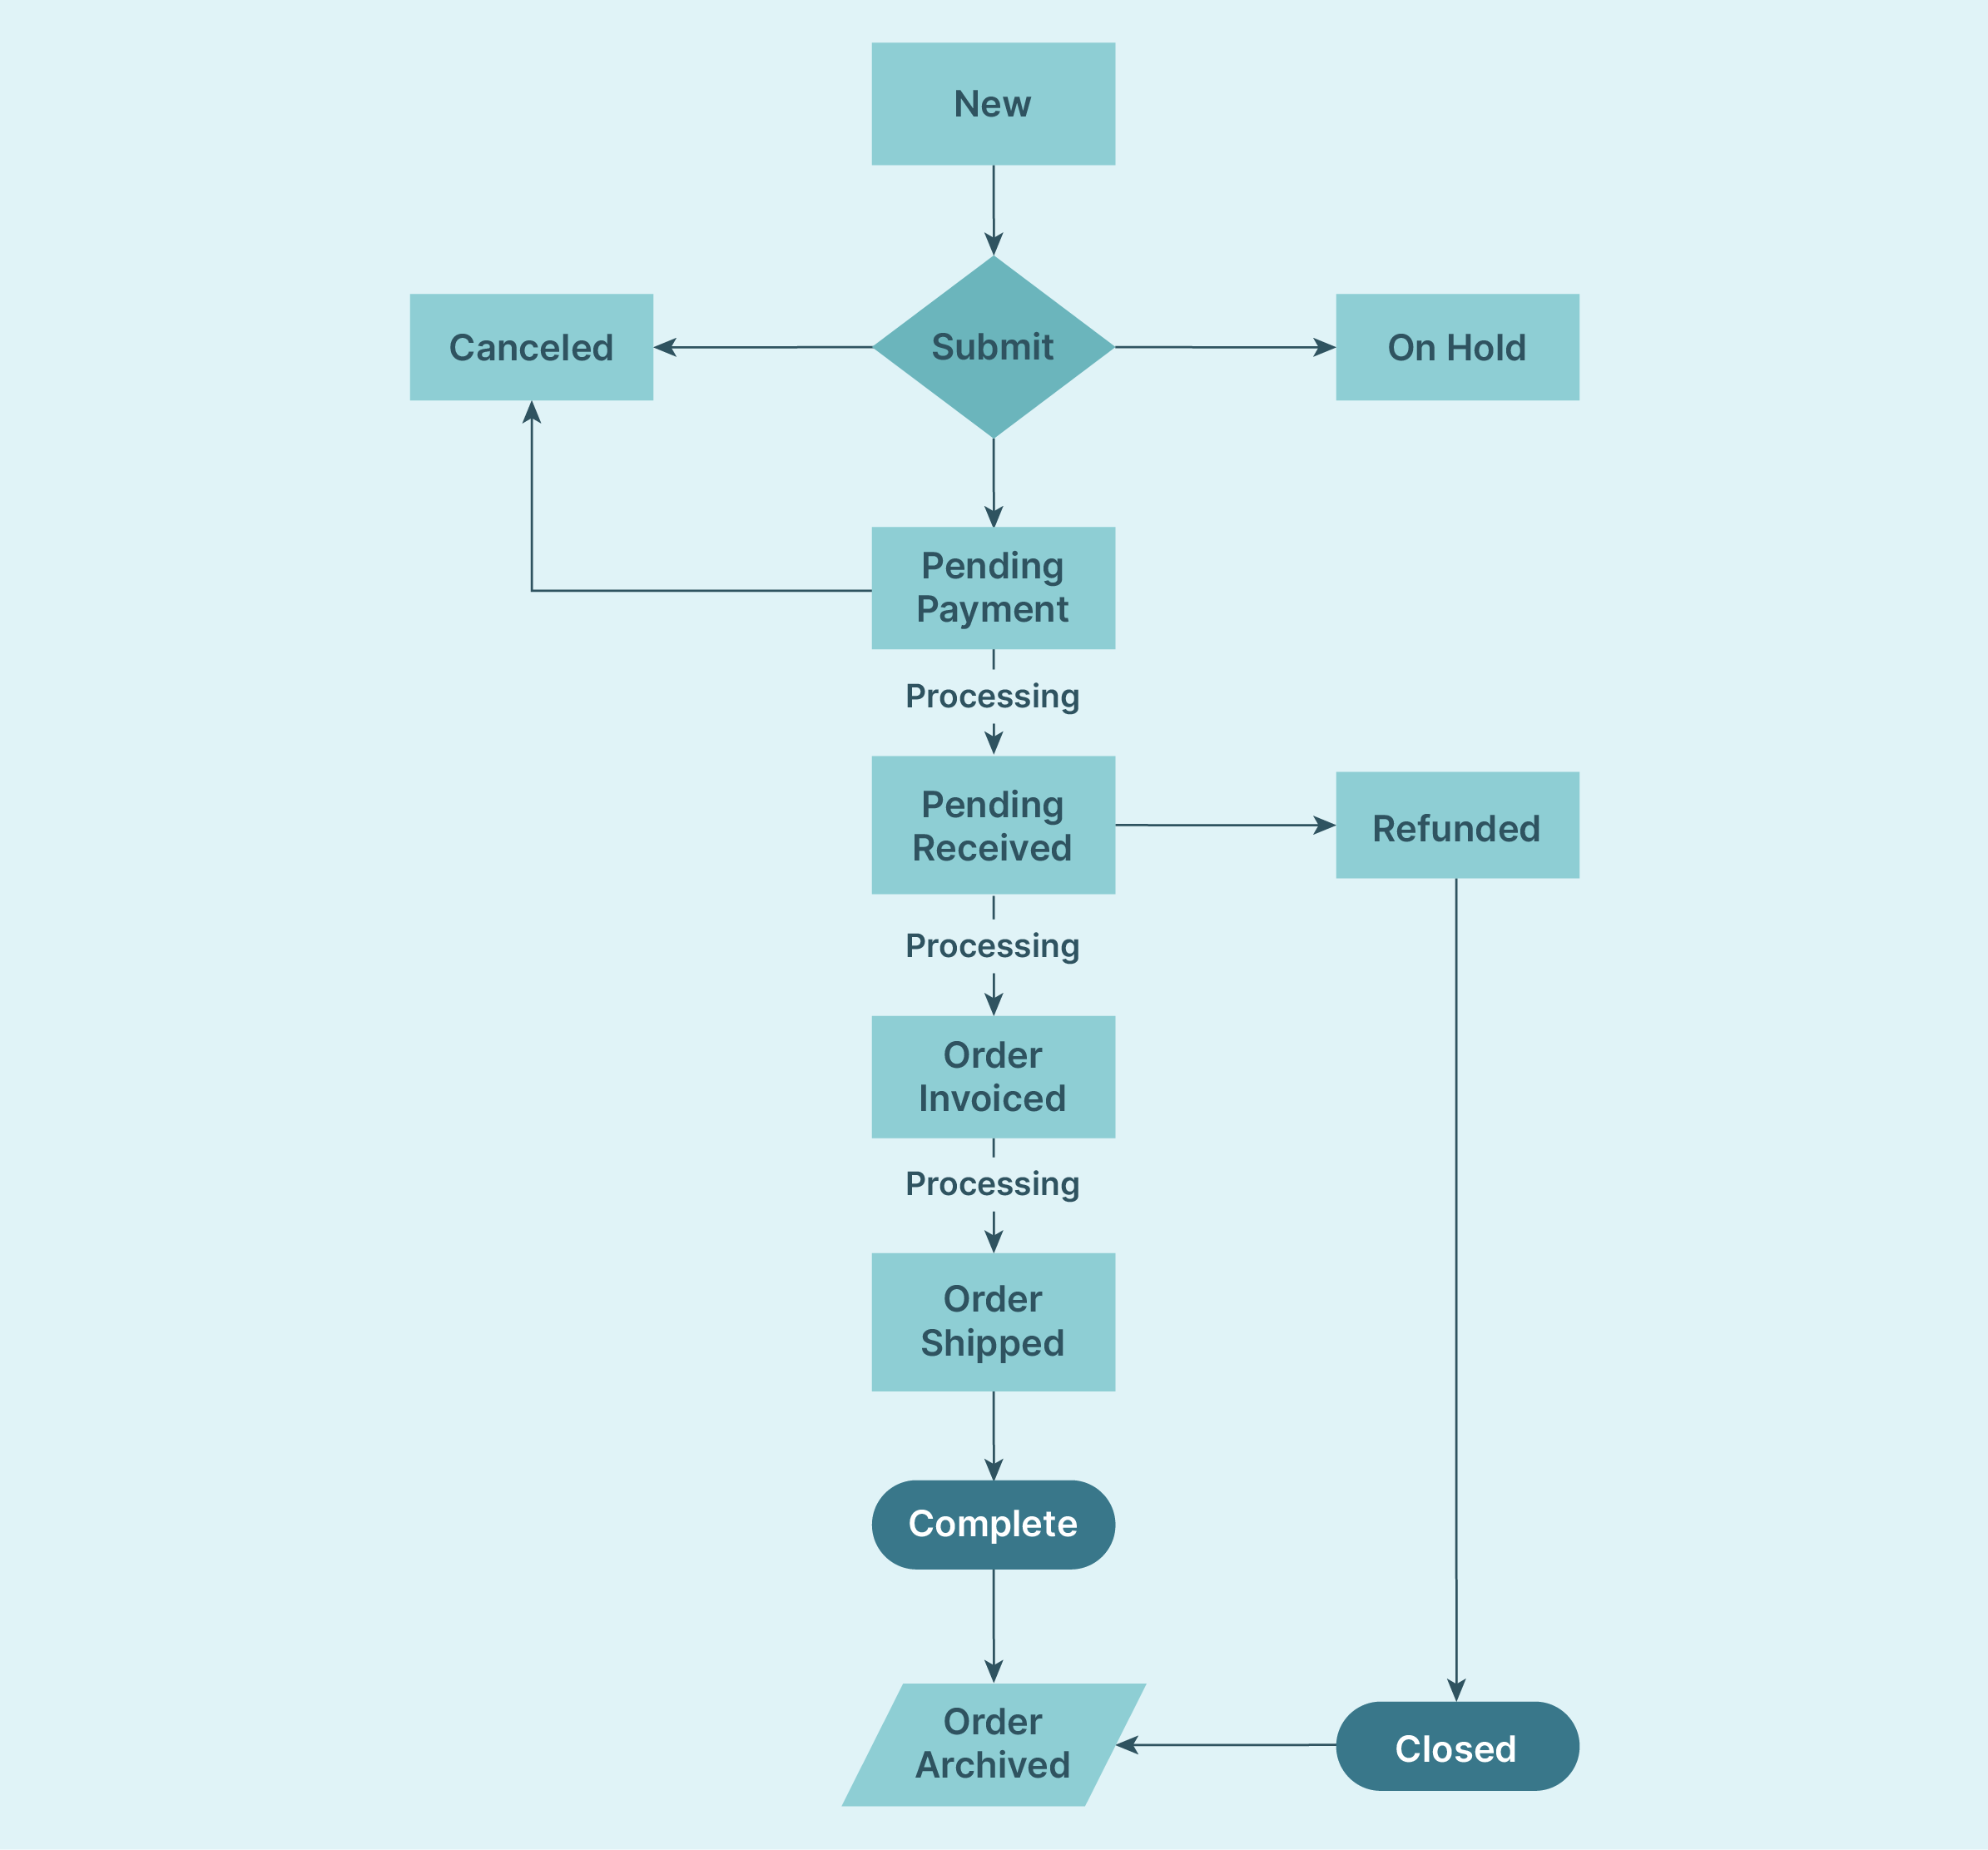 Visual workflow chart of order status progression in Magento 2